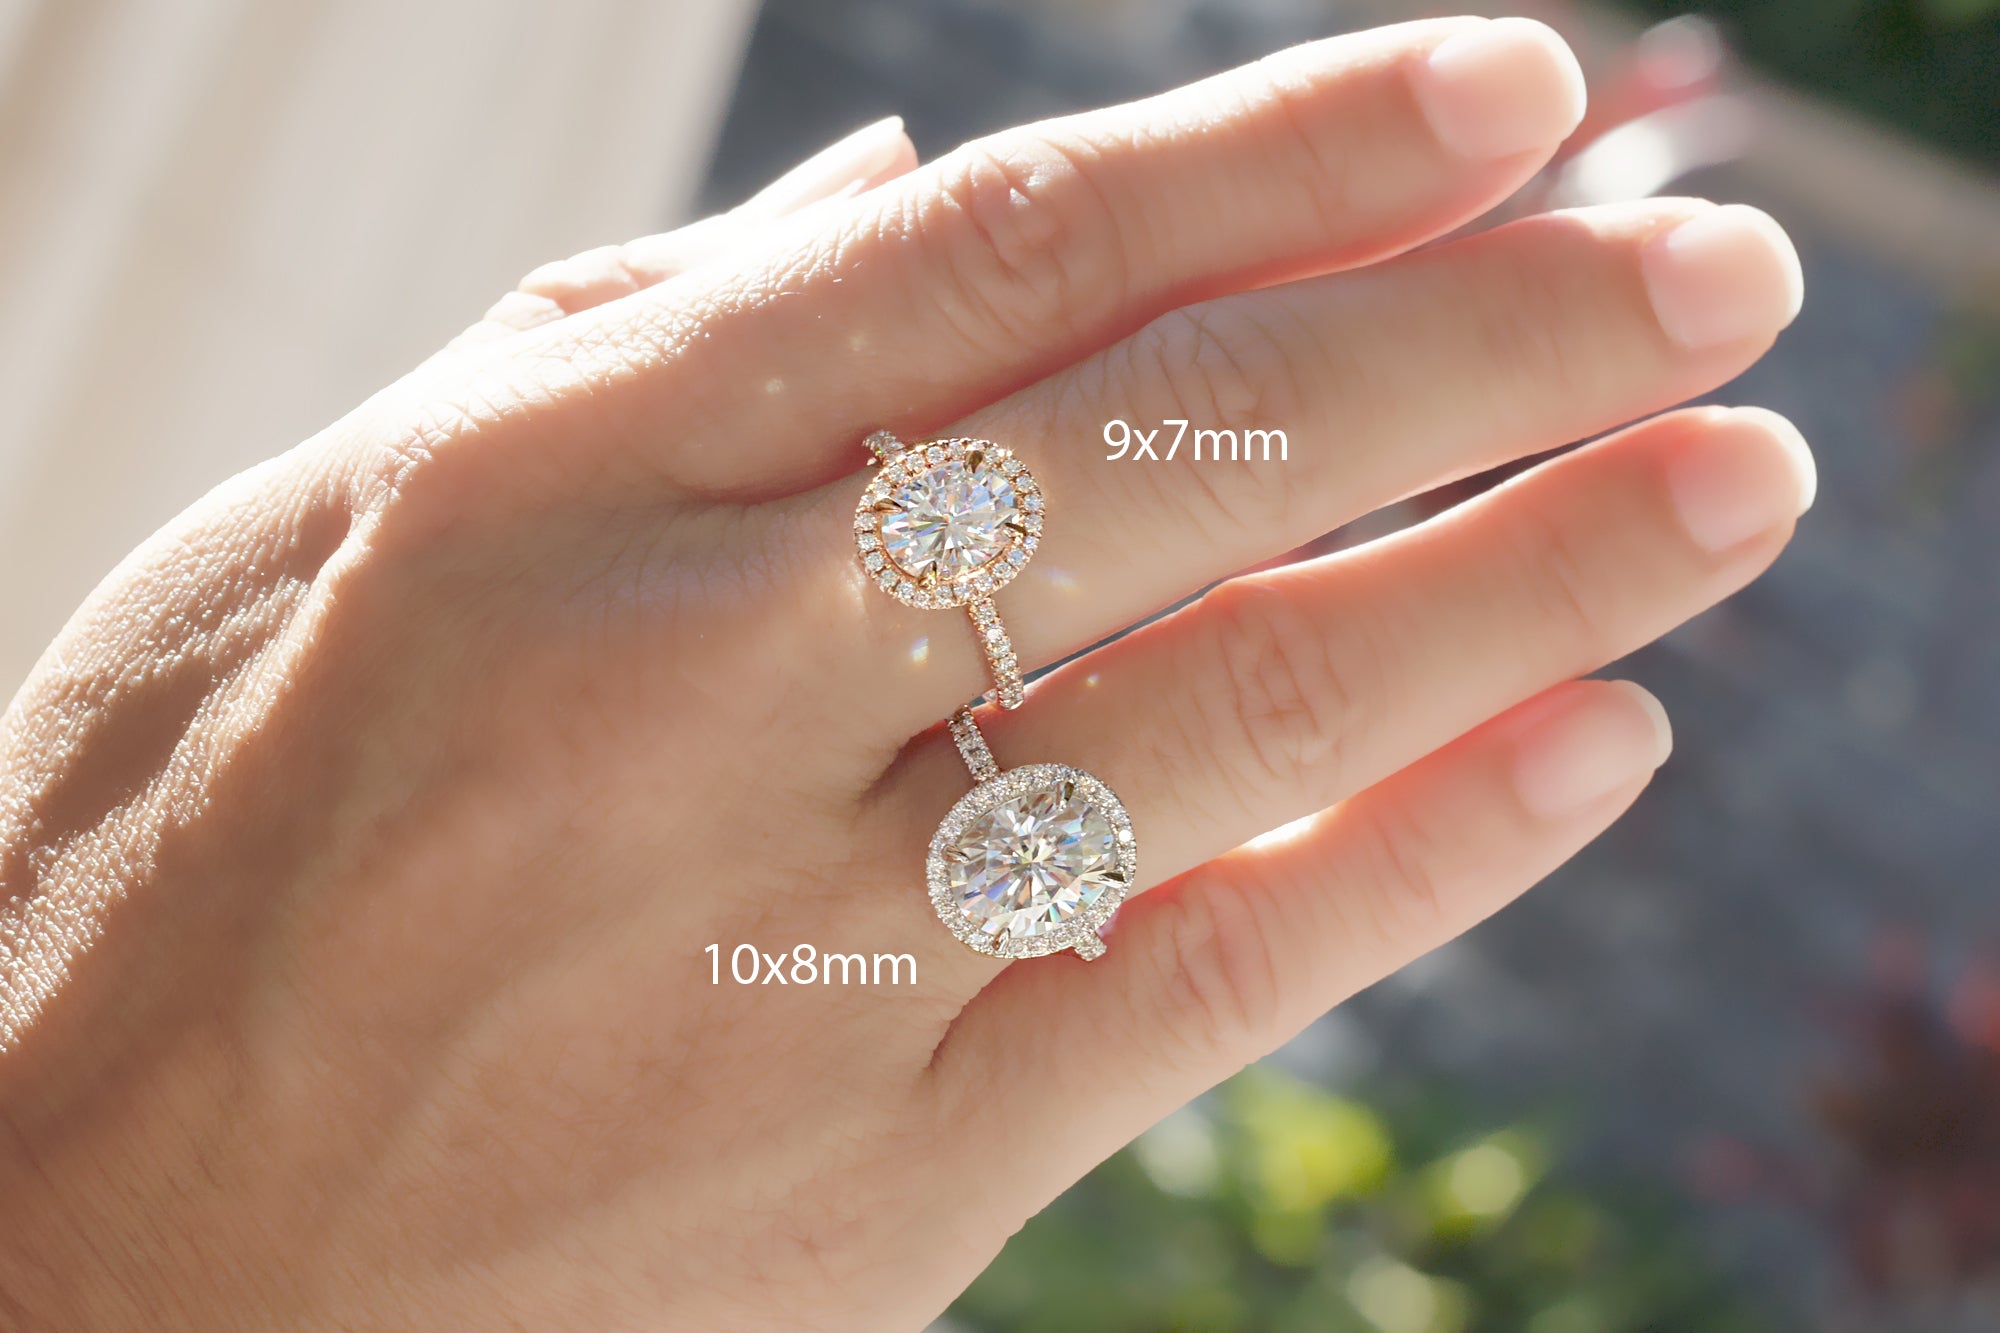 The Drenched Oval Moissanite Ring